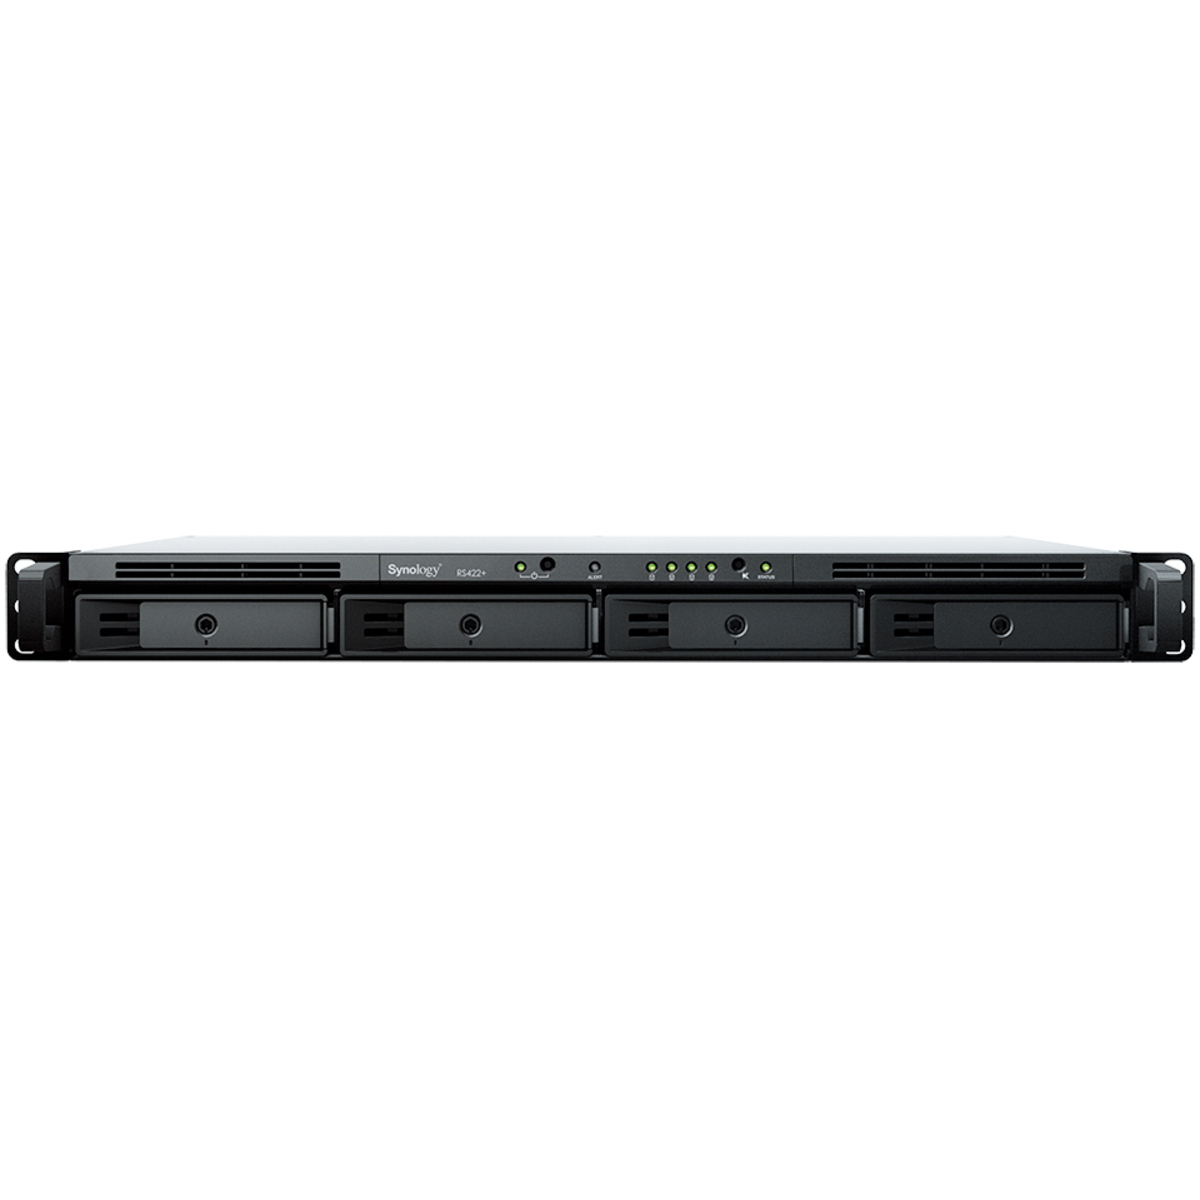 Synology RackStation RS422+ 64tb 4-Bay RackMount Personal / Basic Home / Small Office NAS - Network Attached Storage Device 4x16tb Seagate IronWolf Pro ST16000NT001 3.5 7200rpm SATA 6Gb/s HDD NAS Class Drives Installed - Burn-In Tested - ON SALE RackStation RS422+